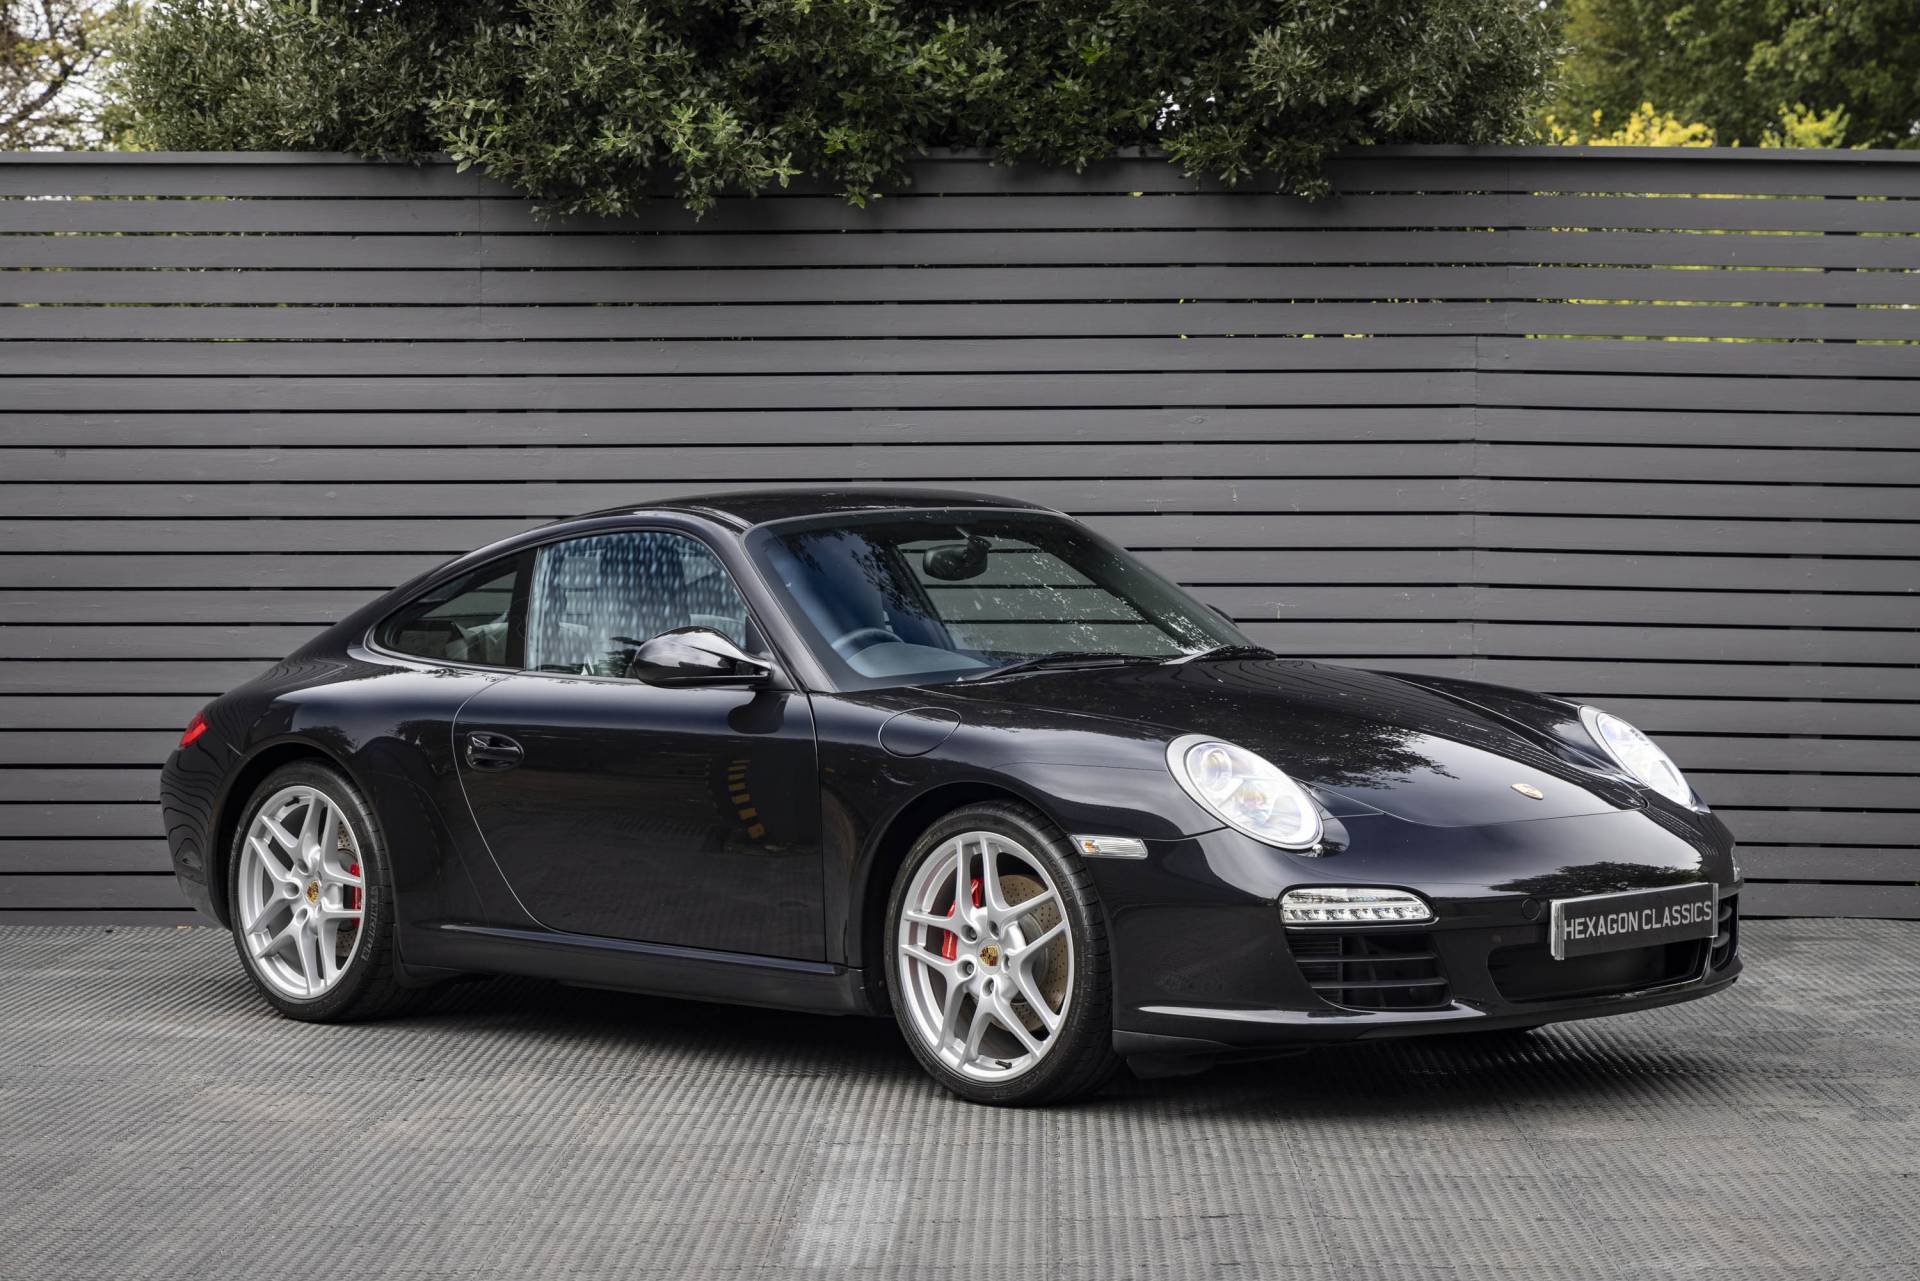 For Sale: Porsche 911 Carrera S (2008) offered for $124,783